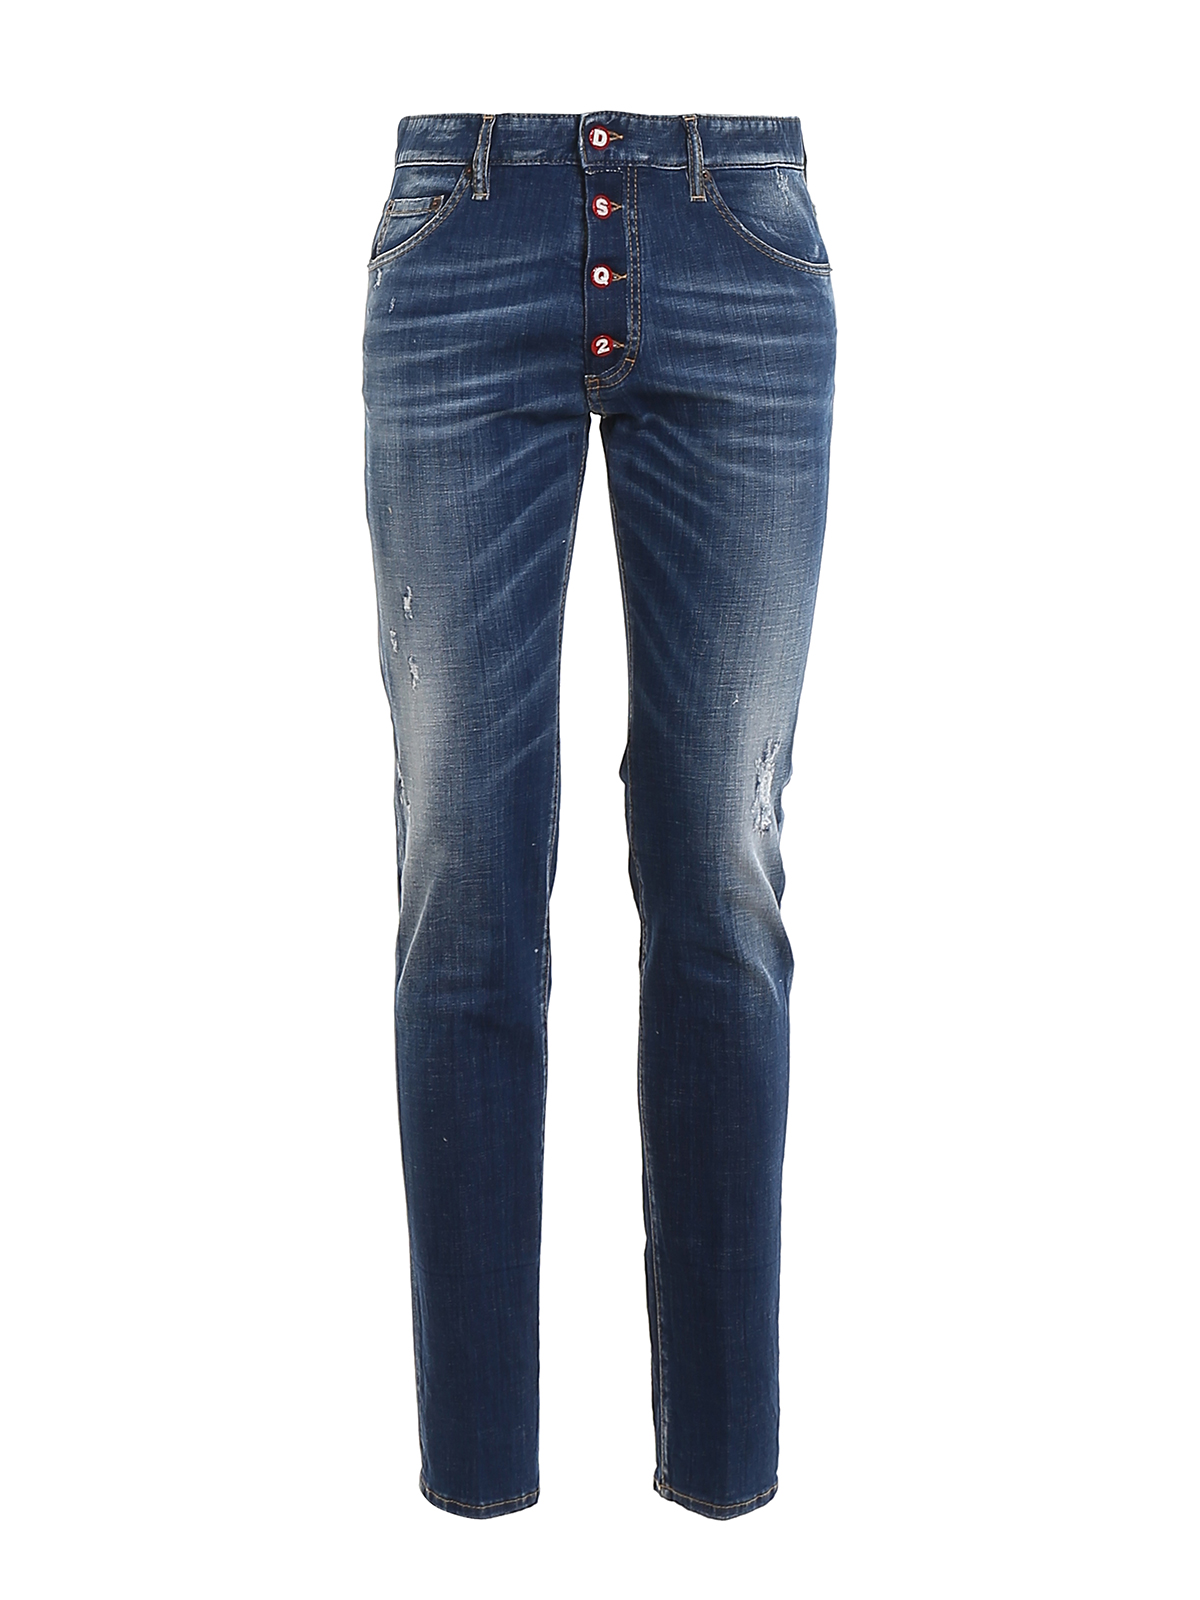 DSQUARED2 COOL GUY FADED JEANS